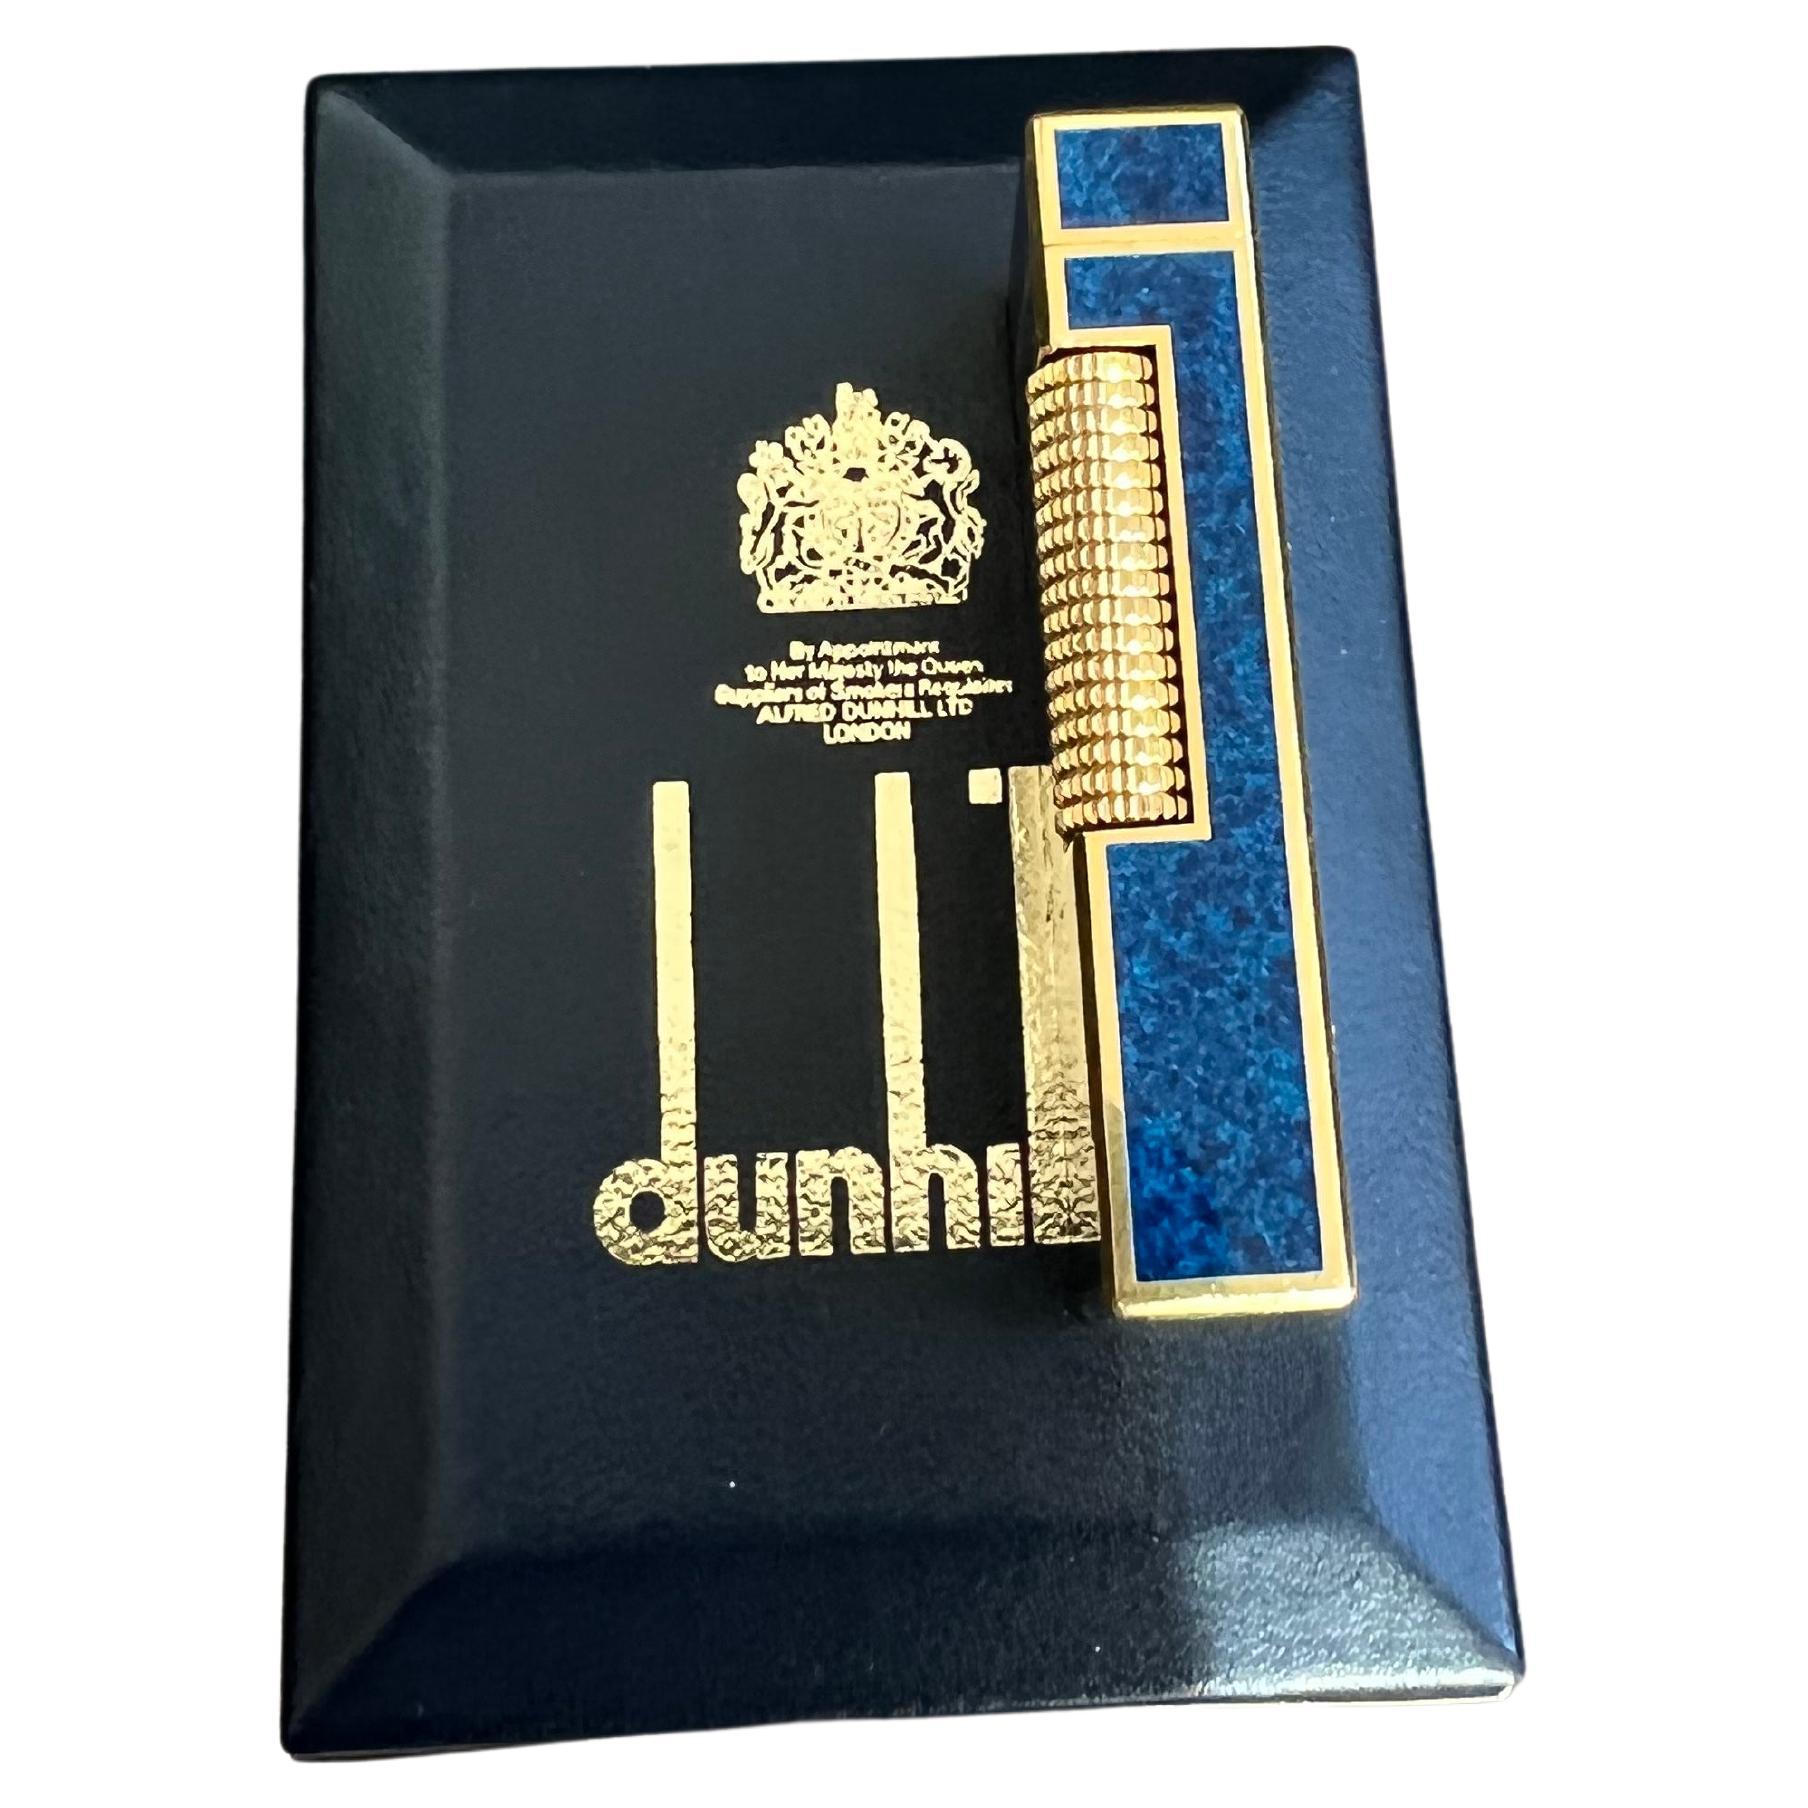 Beautiful, Elegant and Chic Rare Iconic Vintage Dunhill Gold Plated Marble Blue Lacquer Swiss Made Lighter.
This 1980s  Vintage Dunhill is gold plated and has a Blue lacquer Swiss Made lighter In mint condition.
Works perfectly. 
18K gold plating